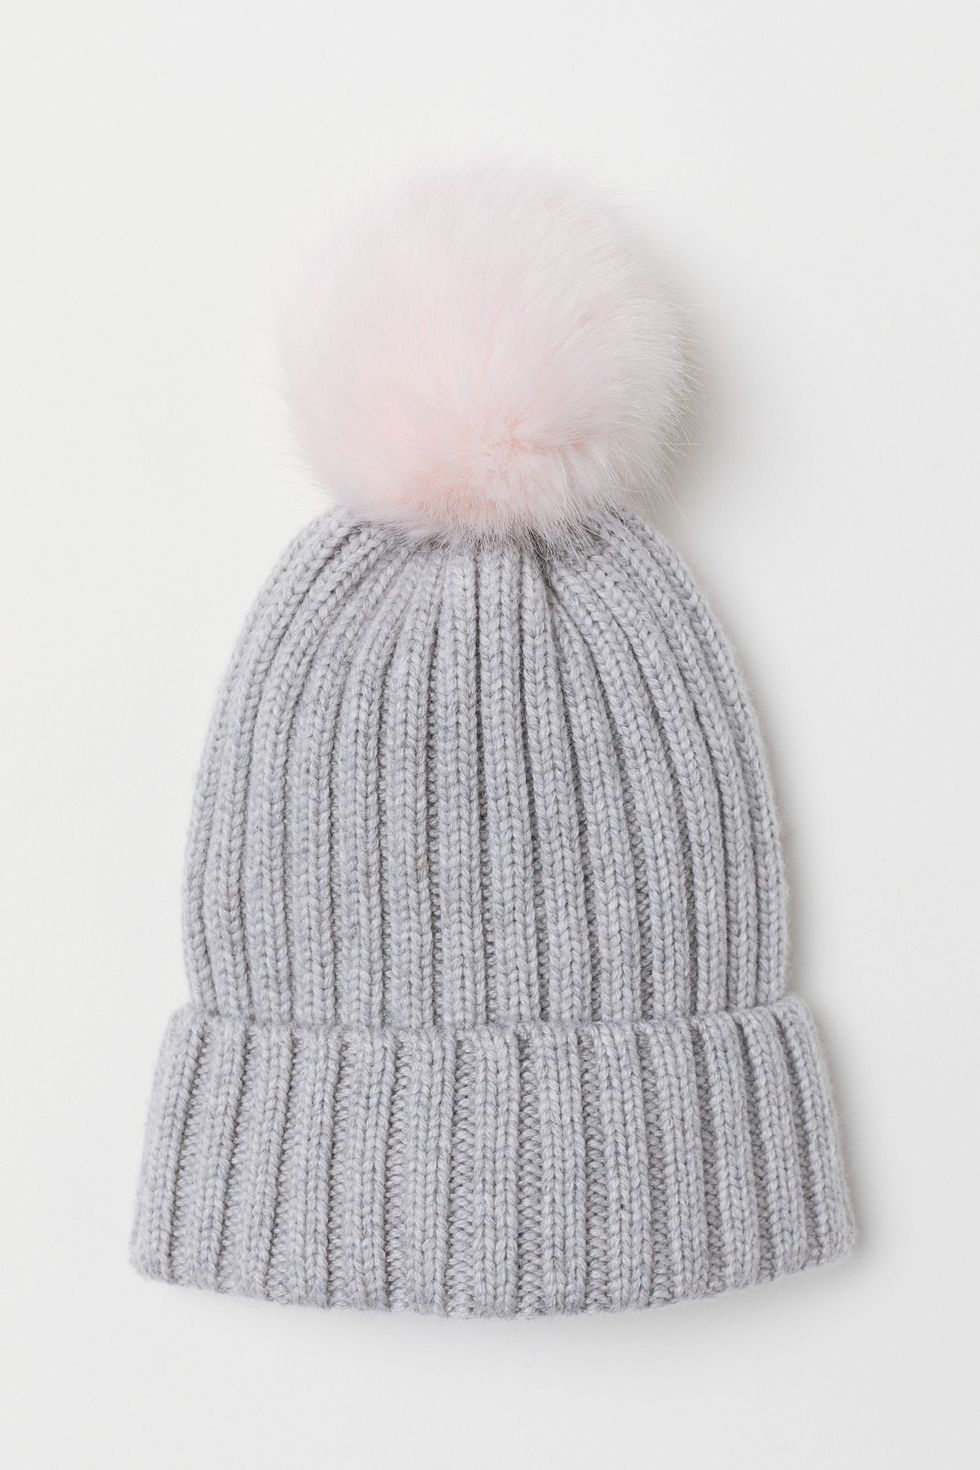 21 Winter Hats You Need to Shop Before It Gets Too Cold - Brit + Co